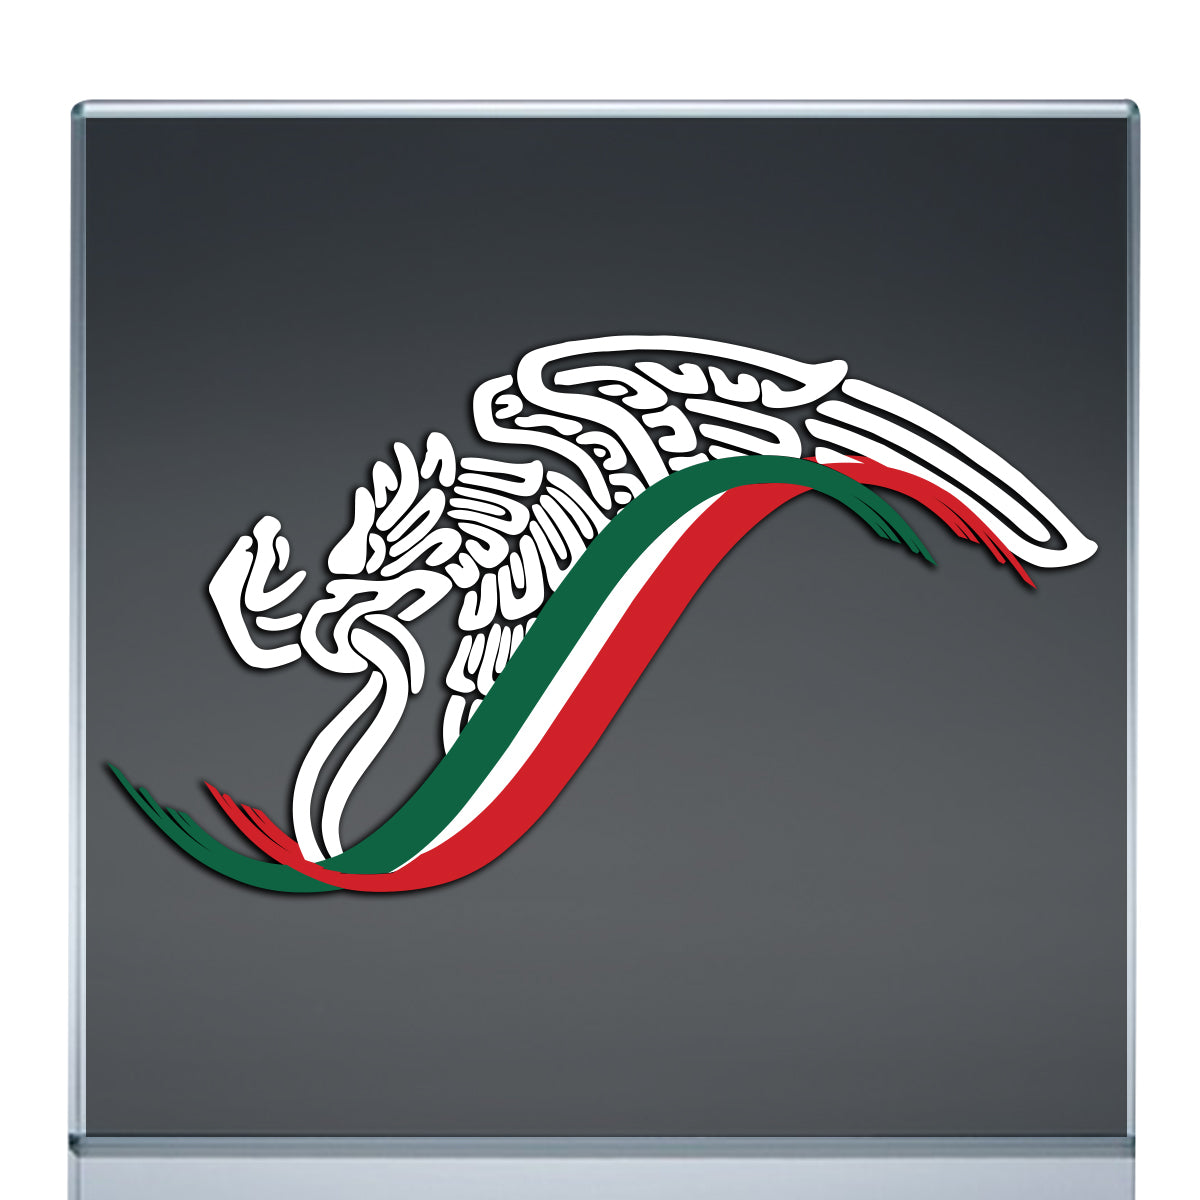  Vaguelly Car Decor Fjbiden Stickers for Car Mexican Flag  Mexican Decor Auto Stickers Sticker for Car Mexico Stickers Canadian Flag  Car Trim Mexico Flag for Wall Window Car Decals Paper